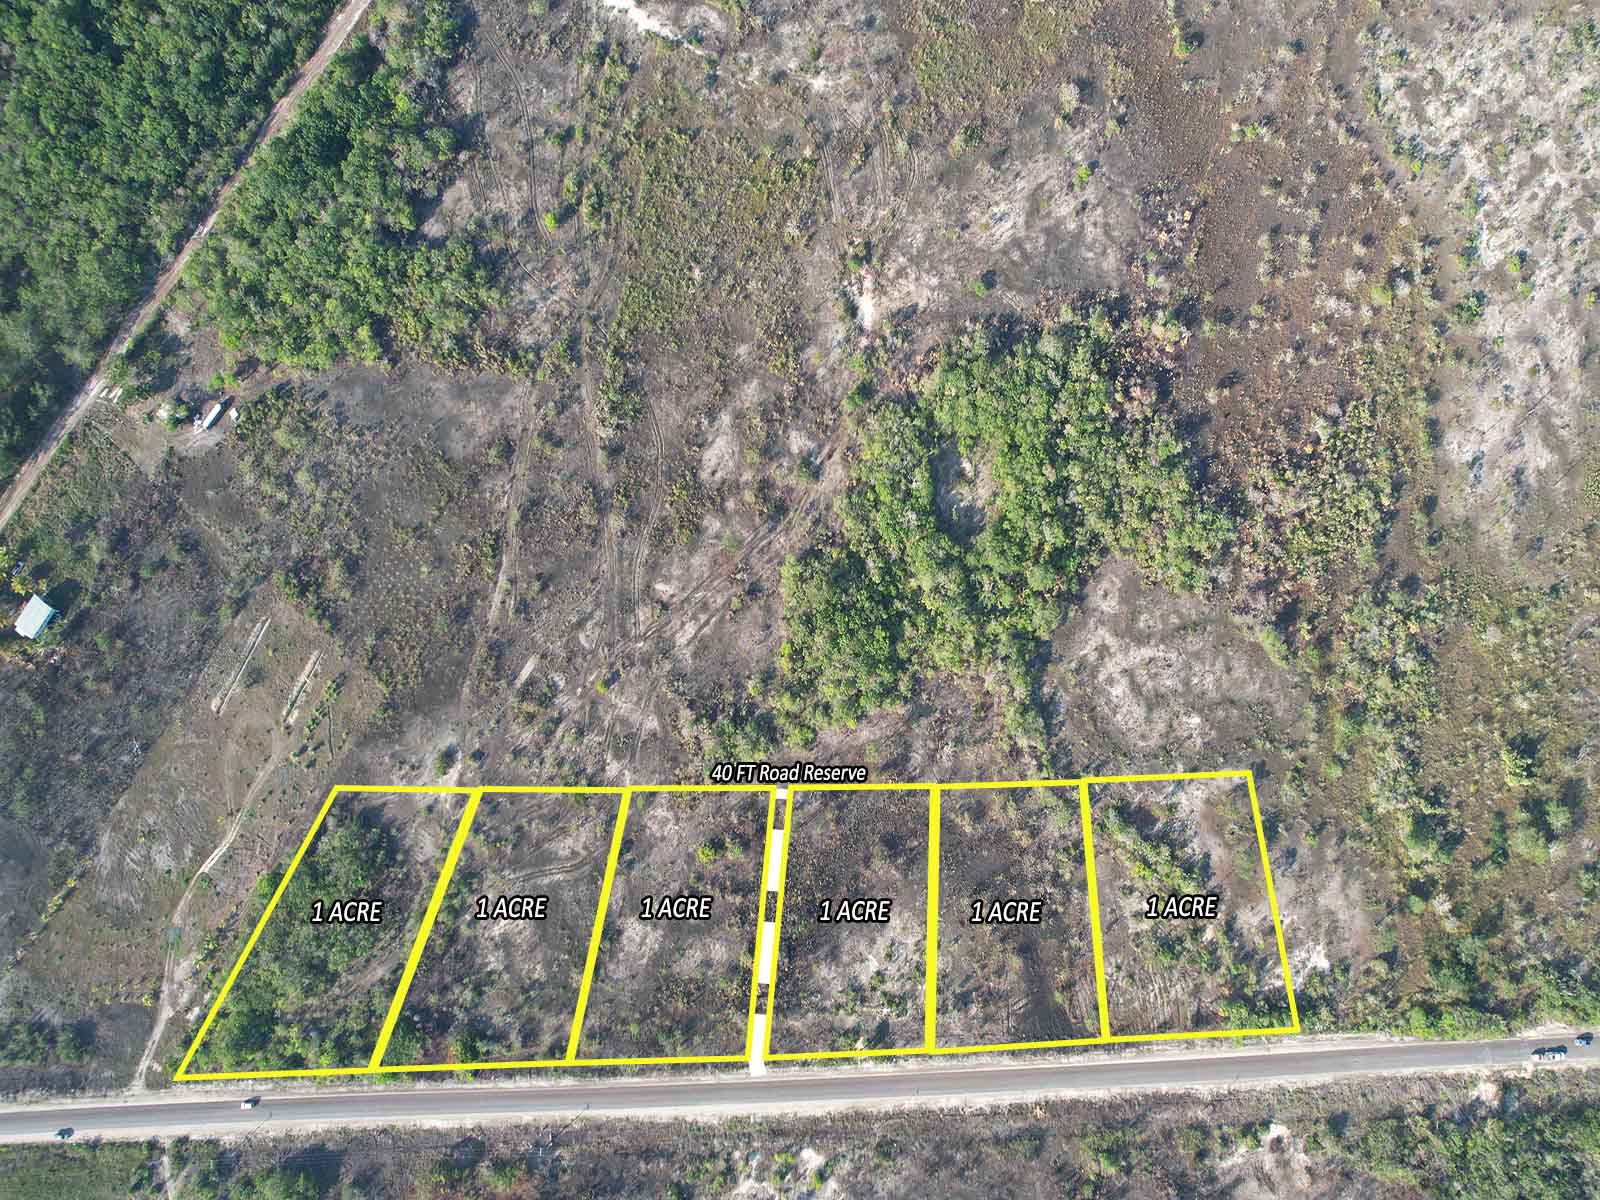 1 Acre Parcels For Sale on The Philip Goldson Highway